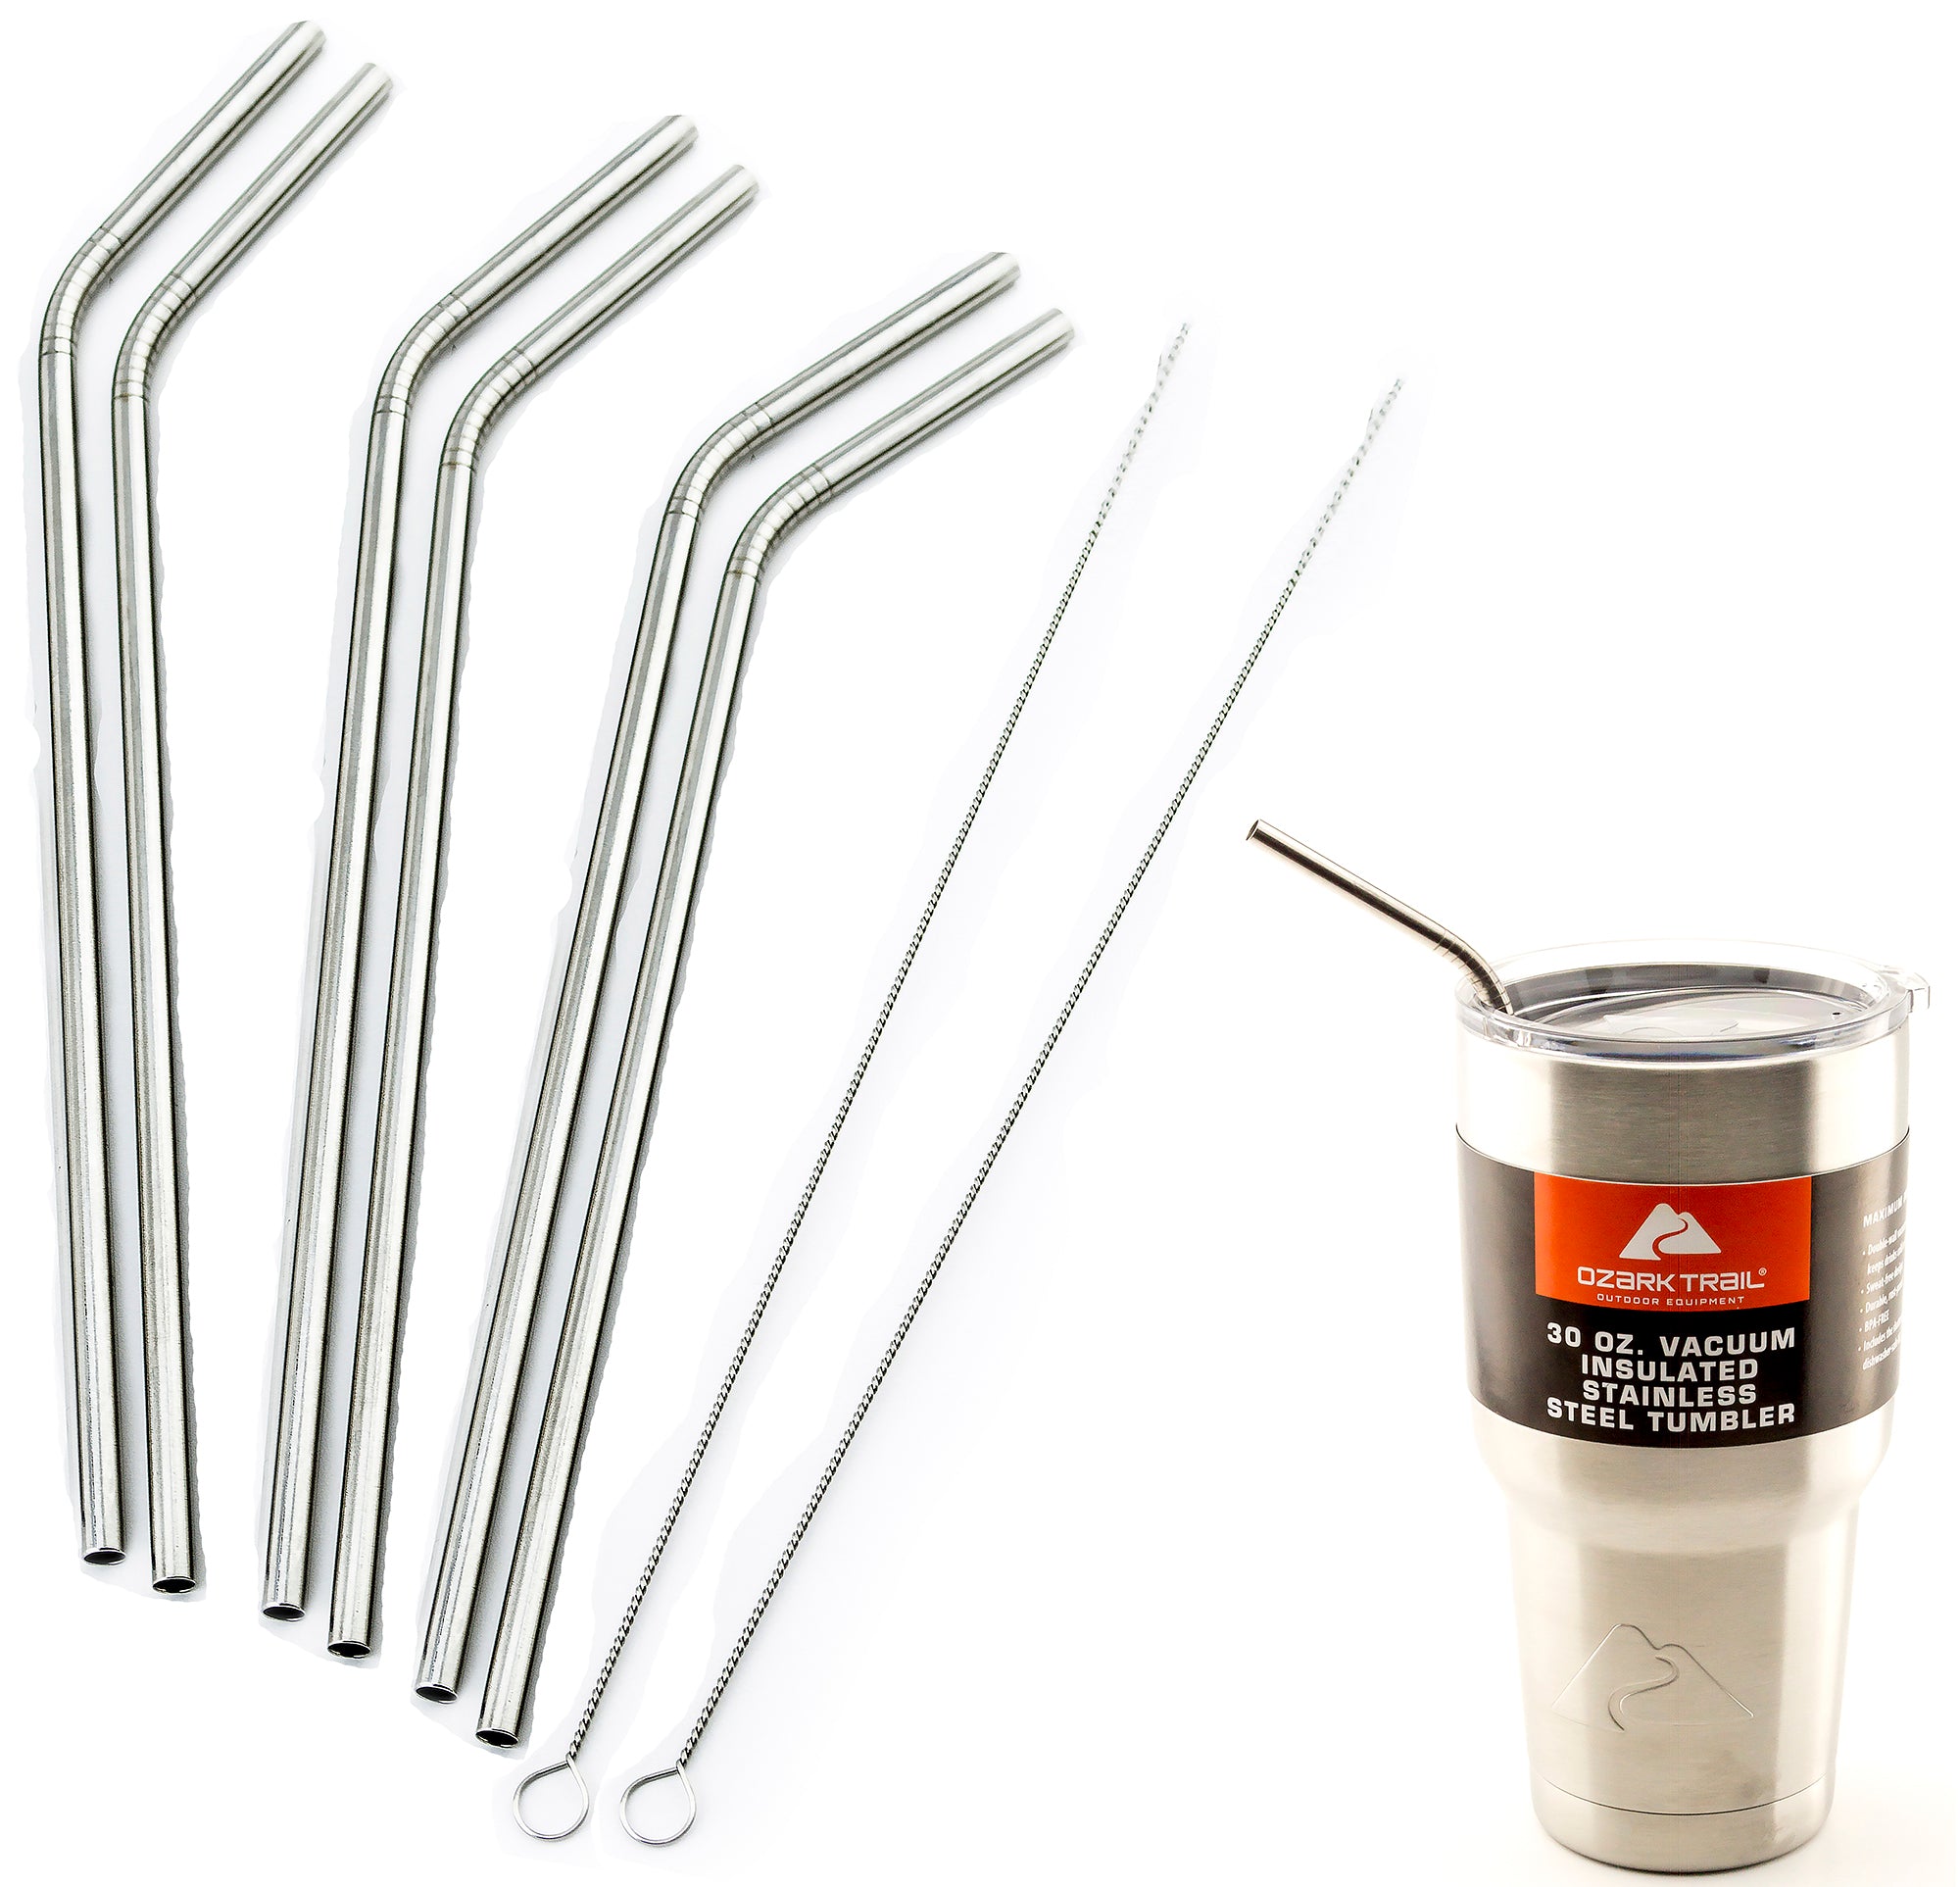 6 Bend LONG 30 oz Stainless Steel Straws fits Ozark Trail Ounce Double-Wall Rambler Vacuum Cups CocoStraw Drinking Straw